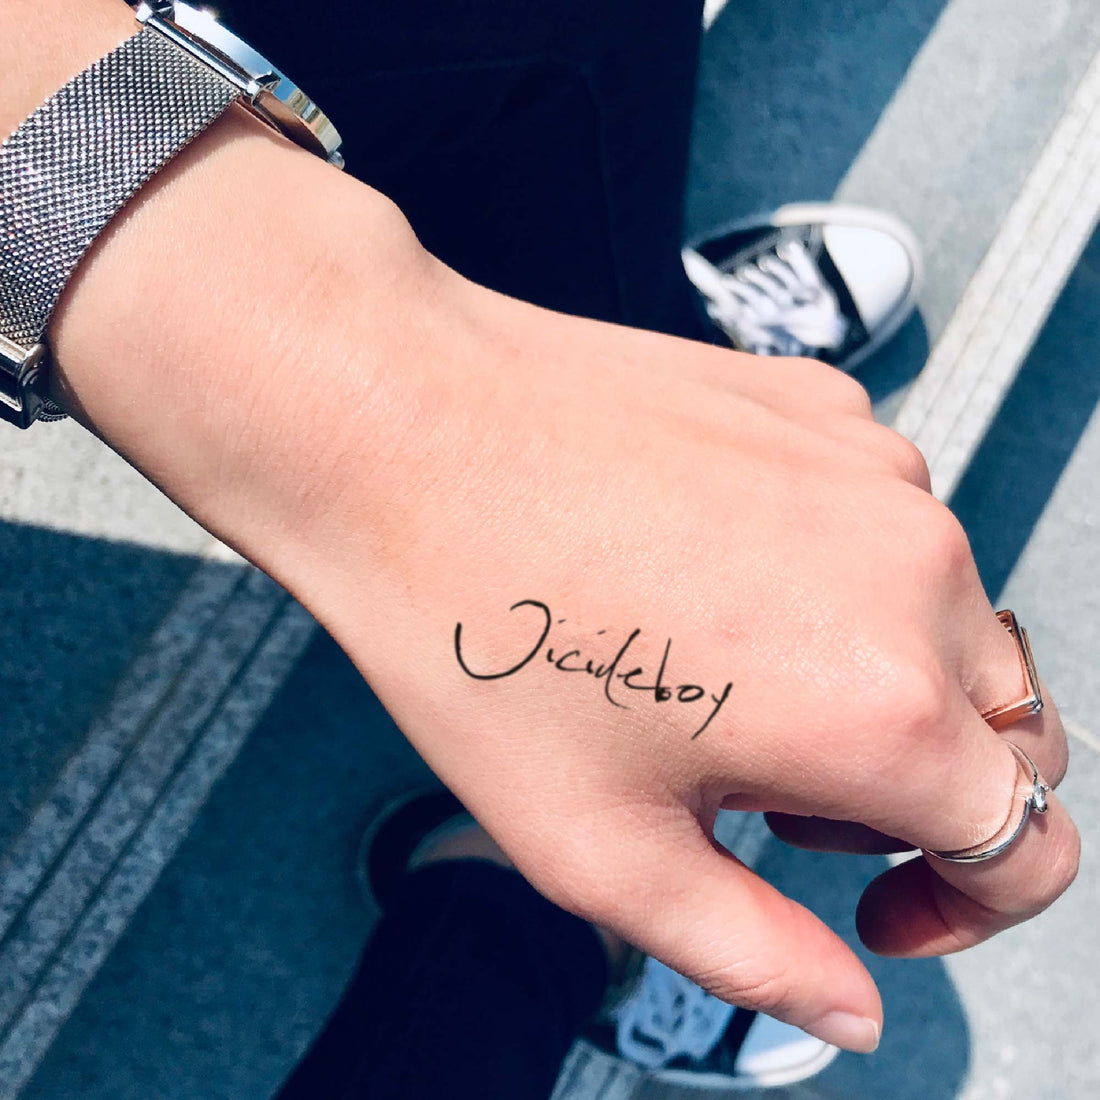 Uicideboy custom temporary tattoo sticker design idea inspiration meanings removal arm wrist hand words font name signature calligraphy lyrics tour concert outfits merch accessory gift souvenir costumes wear dress up code